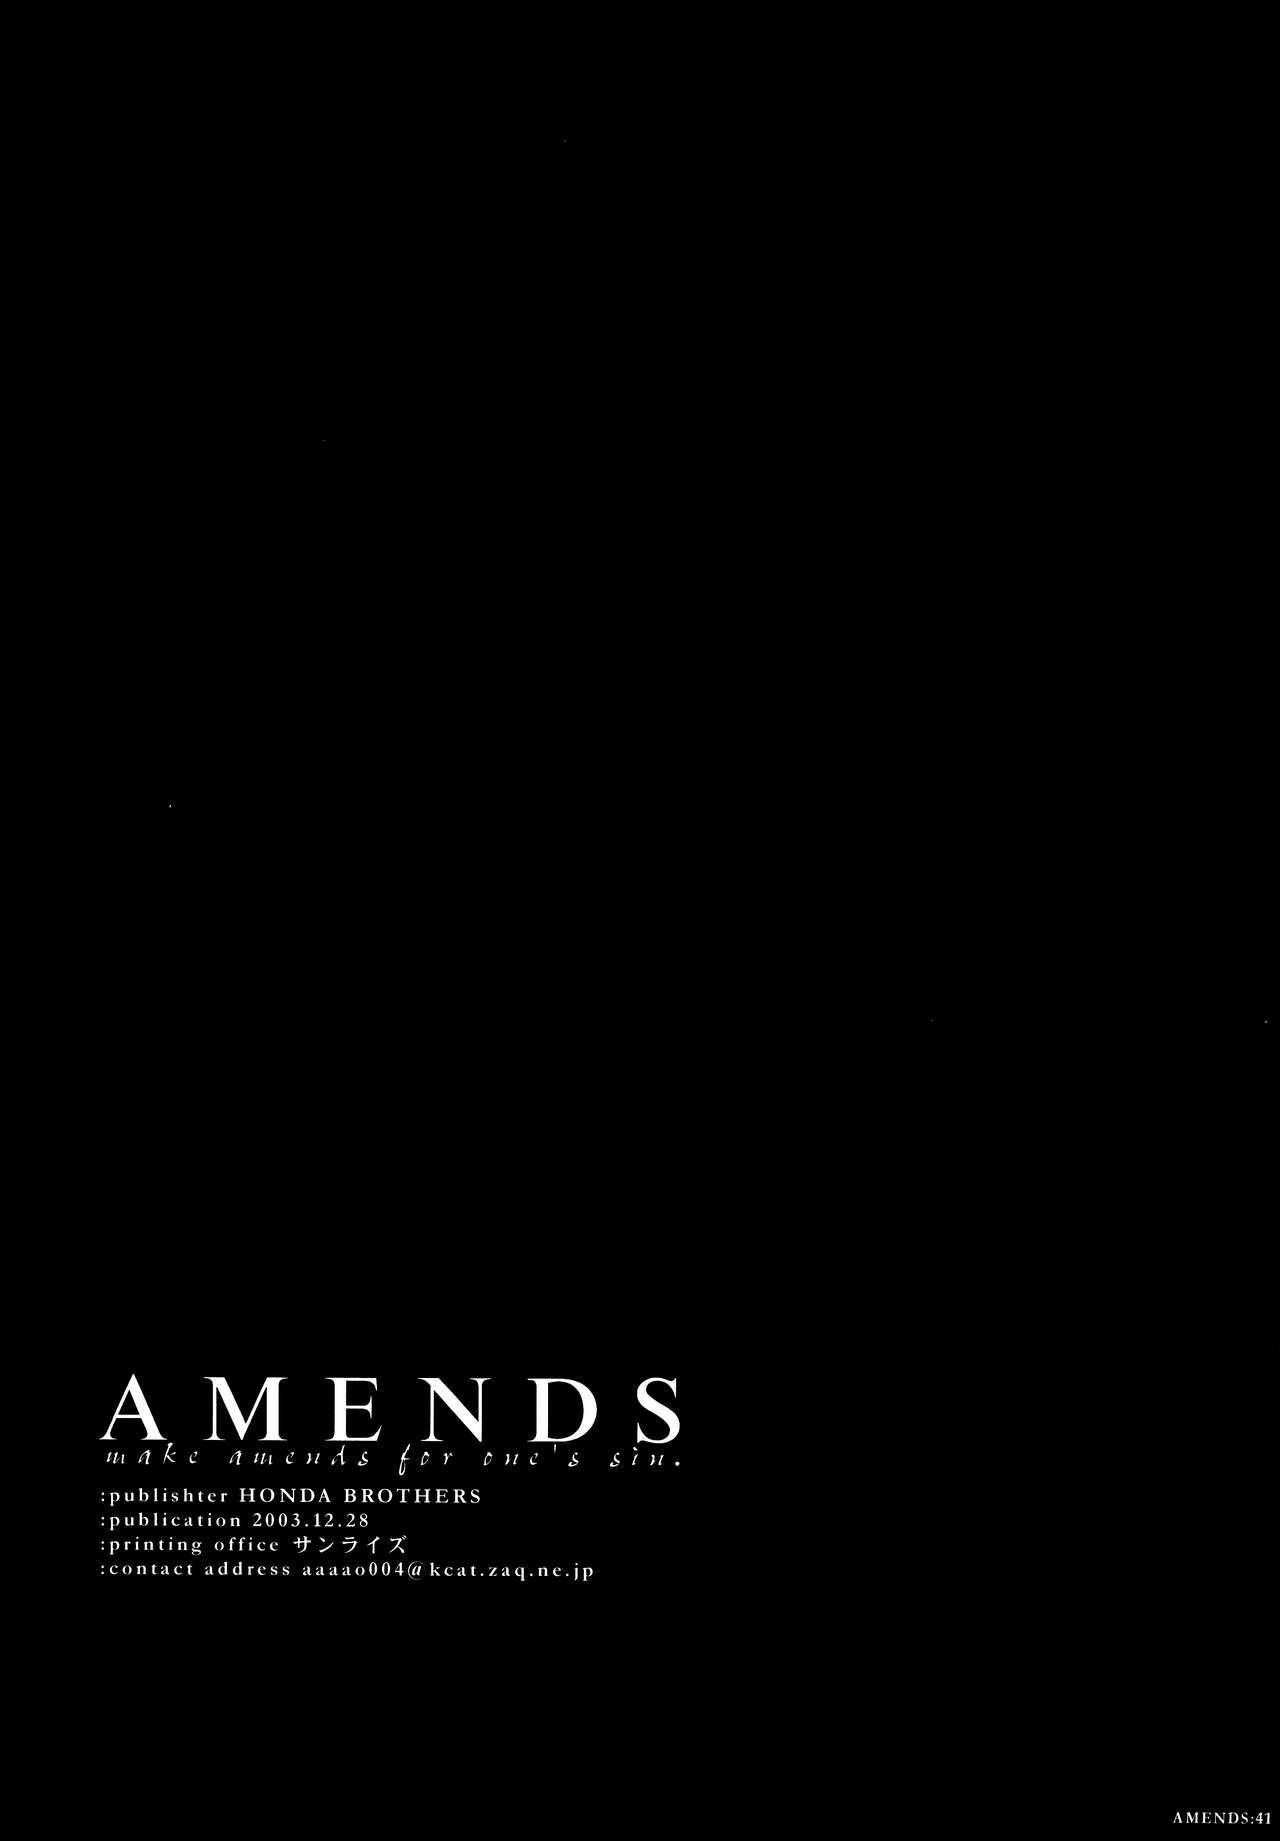 AMENDS - make amends for one's sin. 40